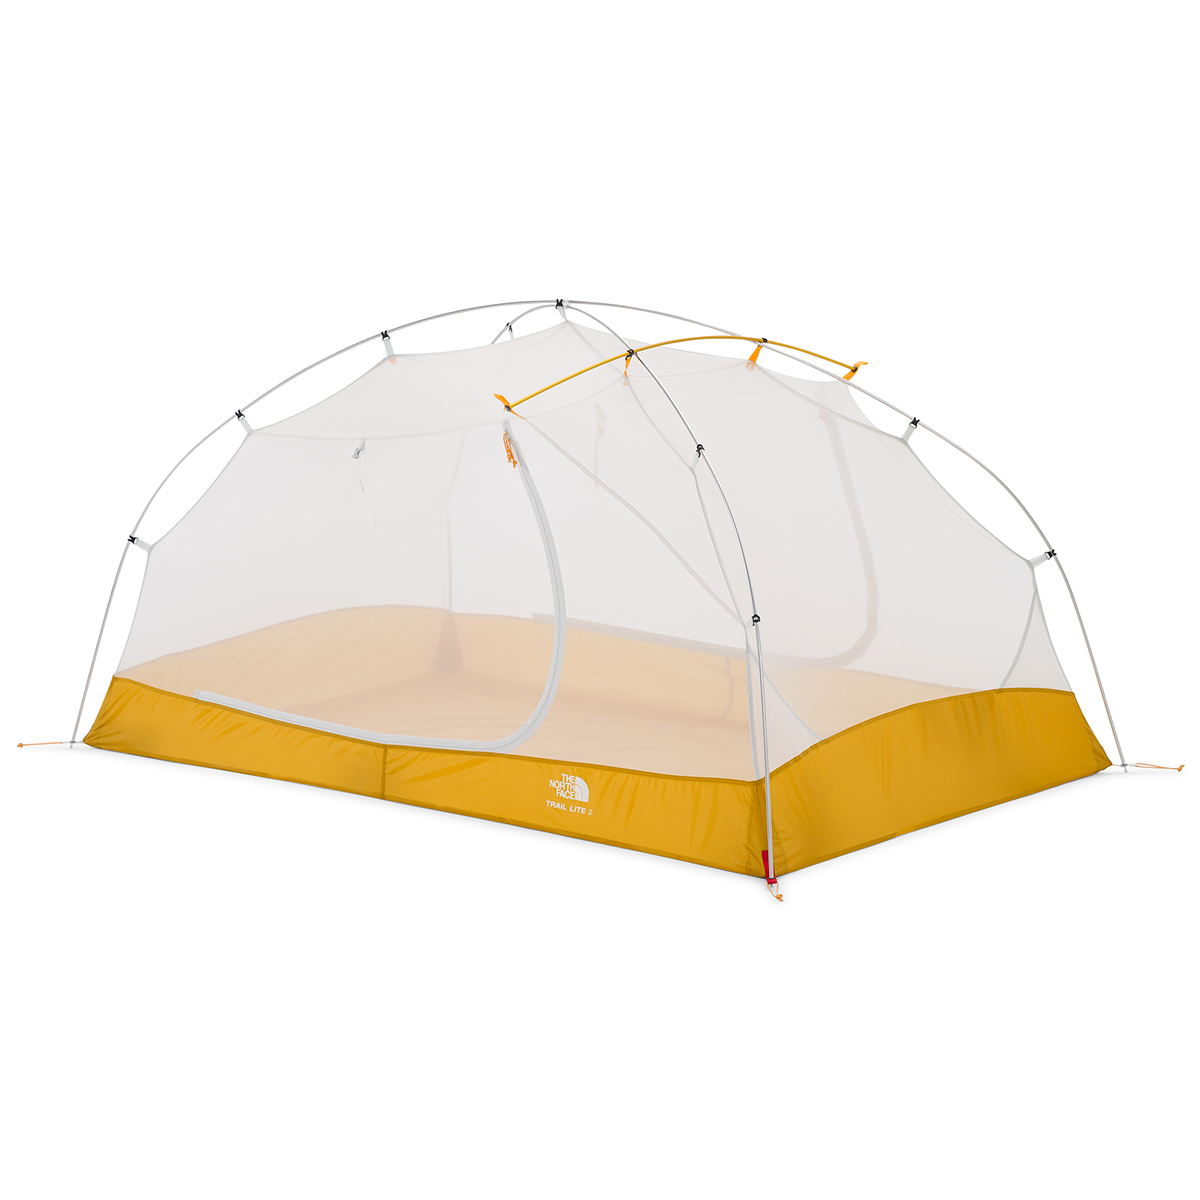 The North Face Trail Lite 2 Backpacking Tent